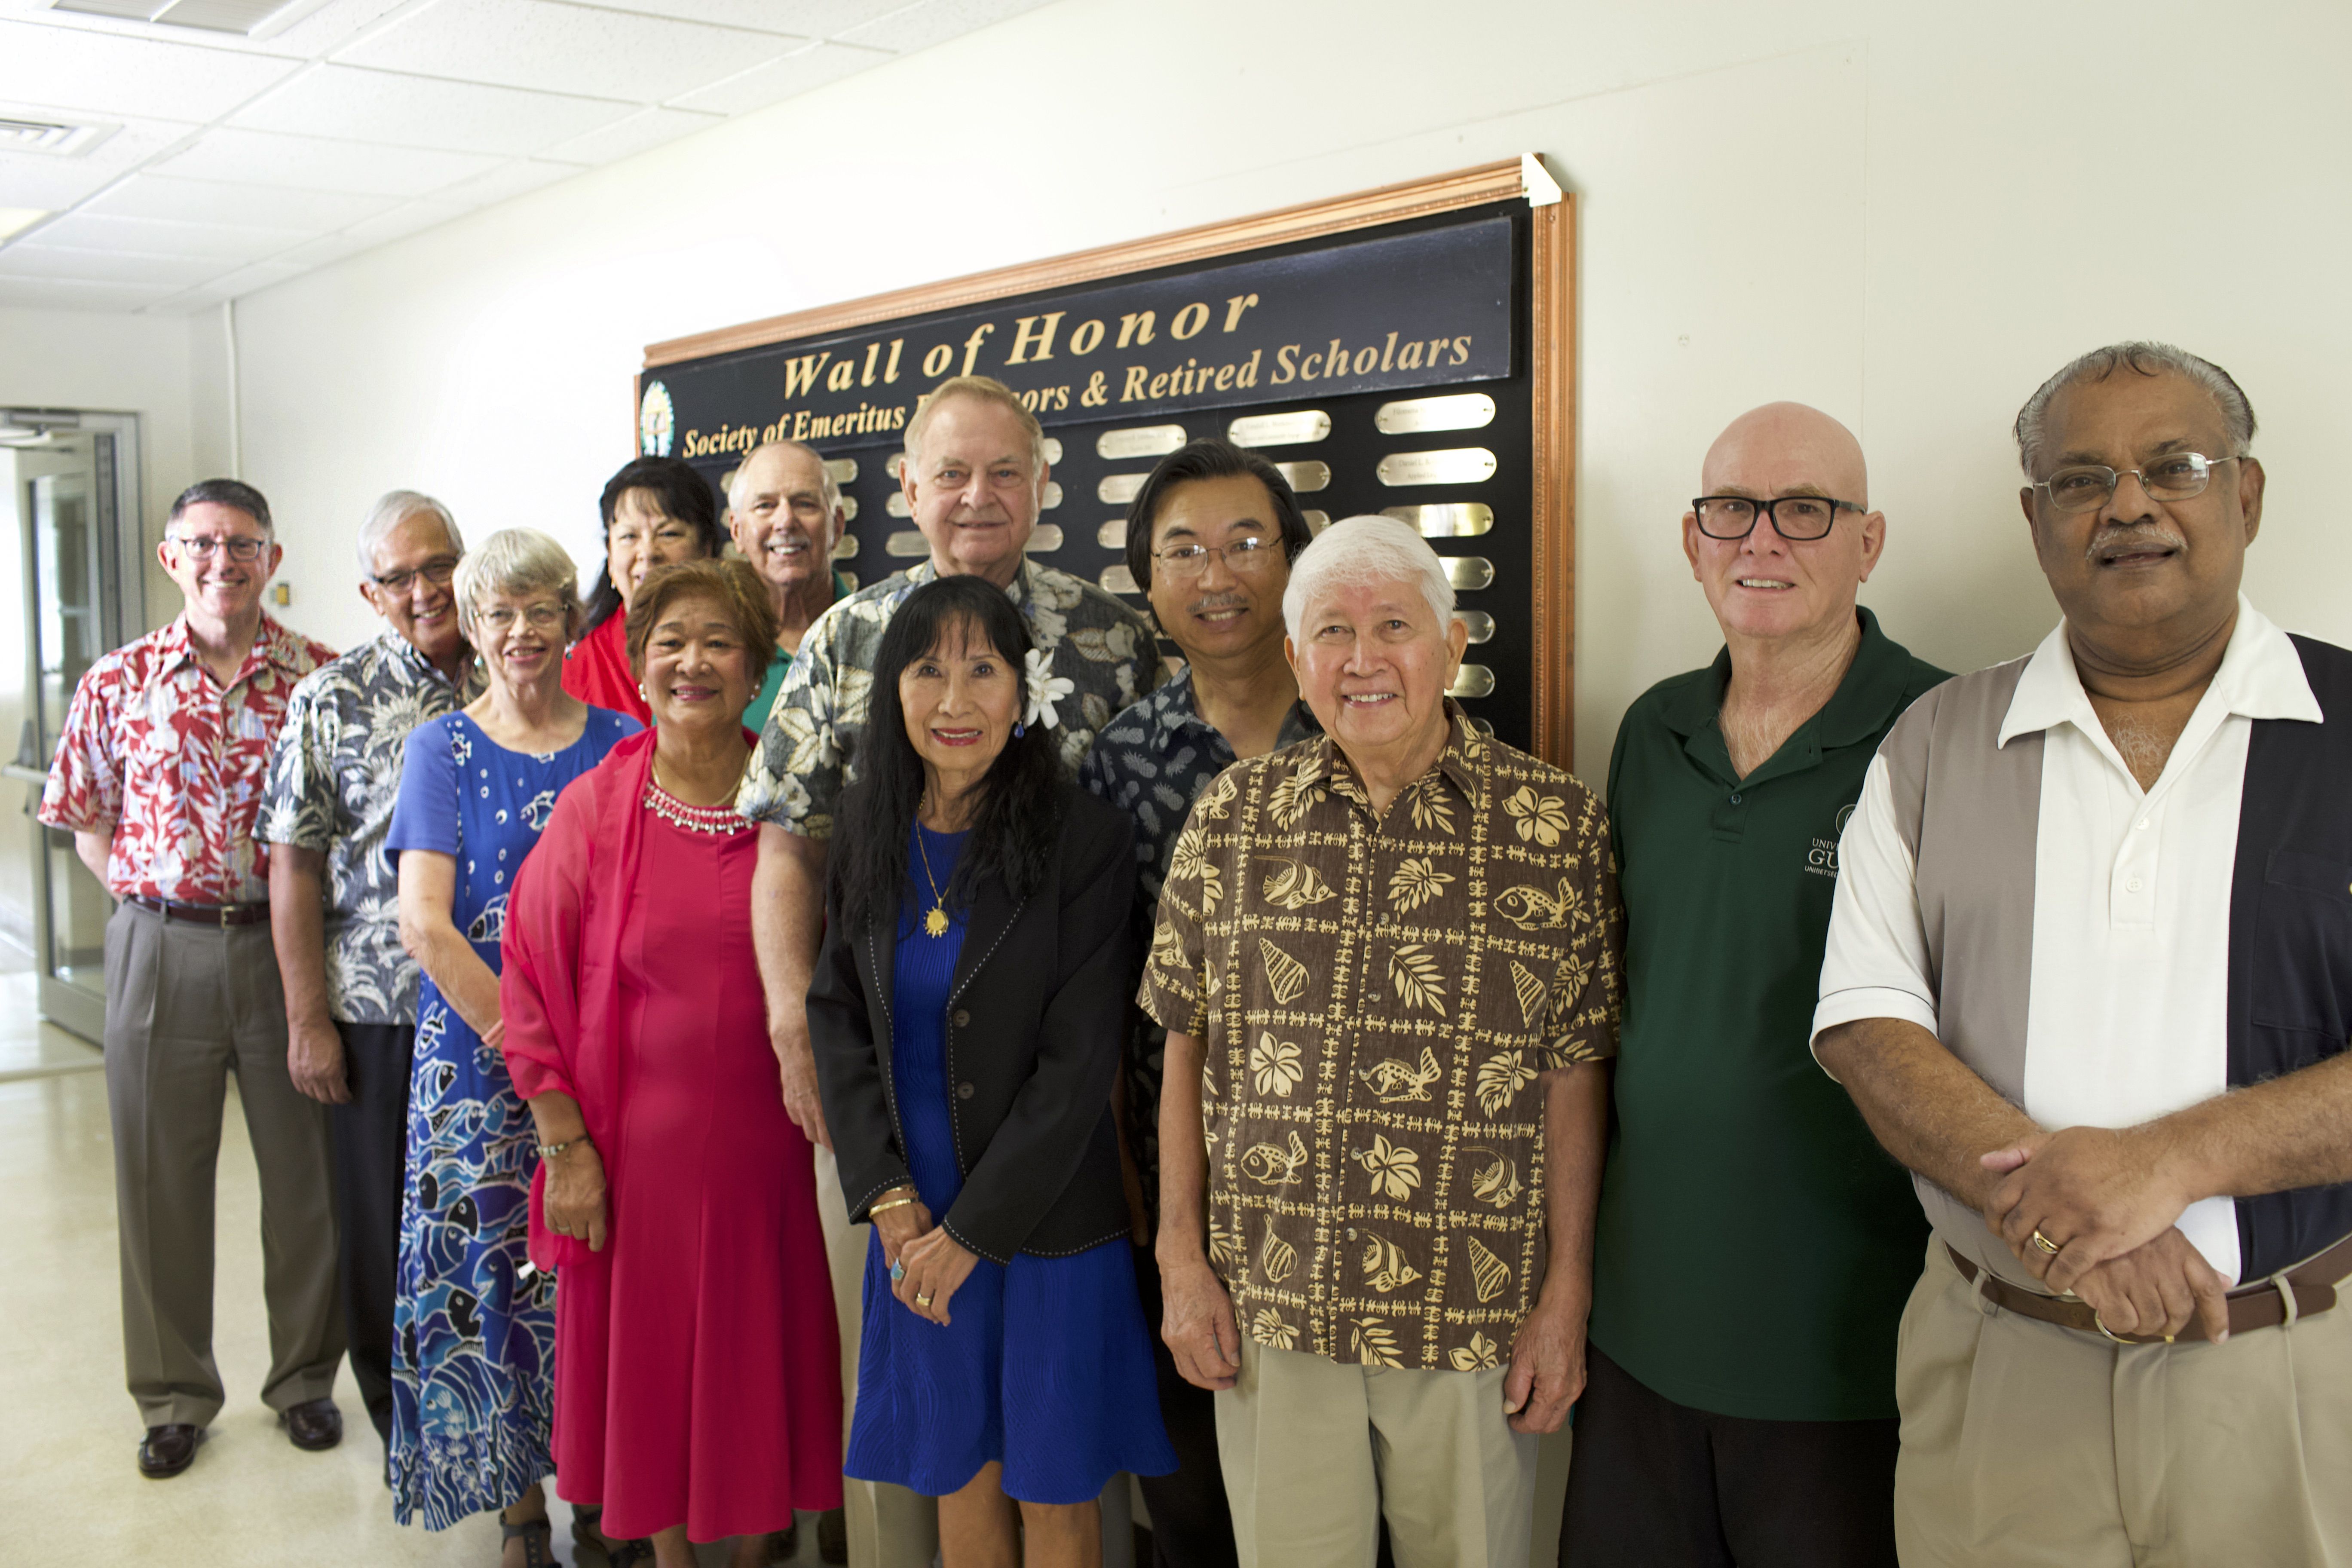 The University of Guam Society of Emeritus Professors and Retired Scholars at a meeting in September.